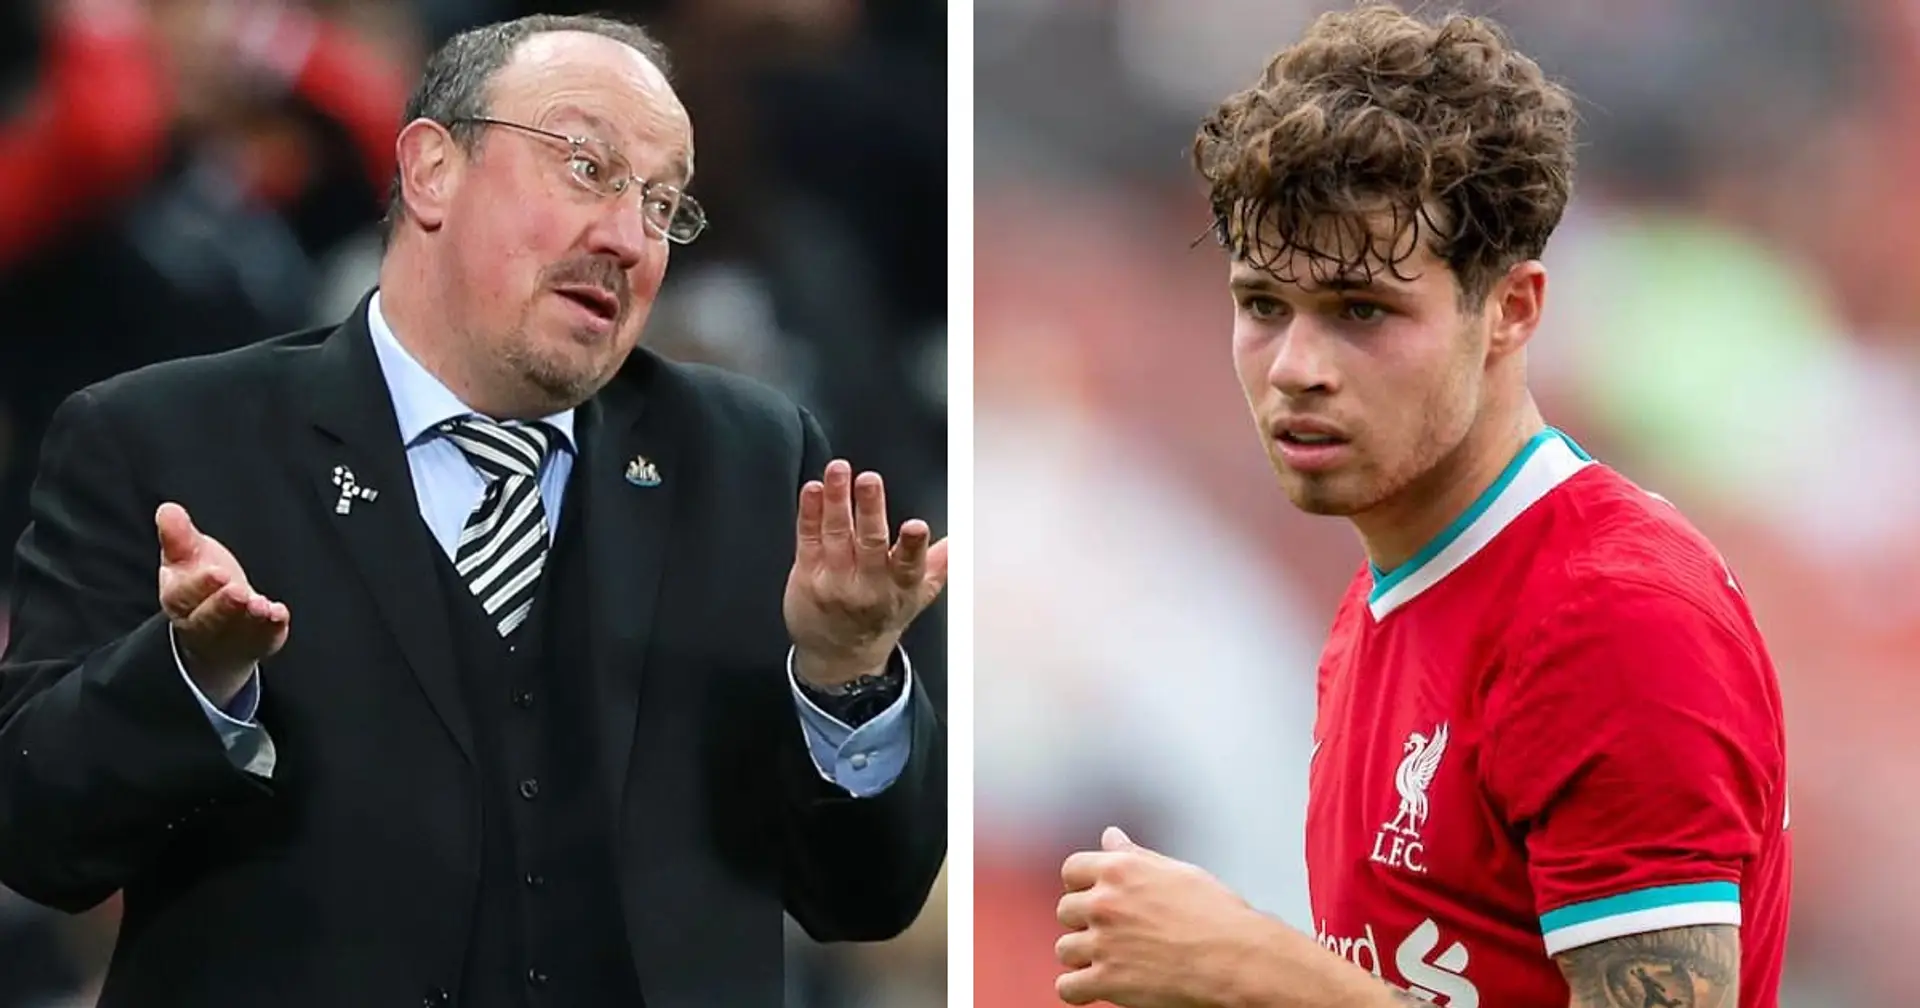 Fan outrage reportedly forces Everton to rule out Benitez hiring & 3 more big stories at Liverpool you might've missed